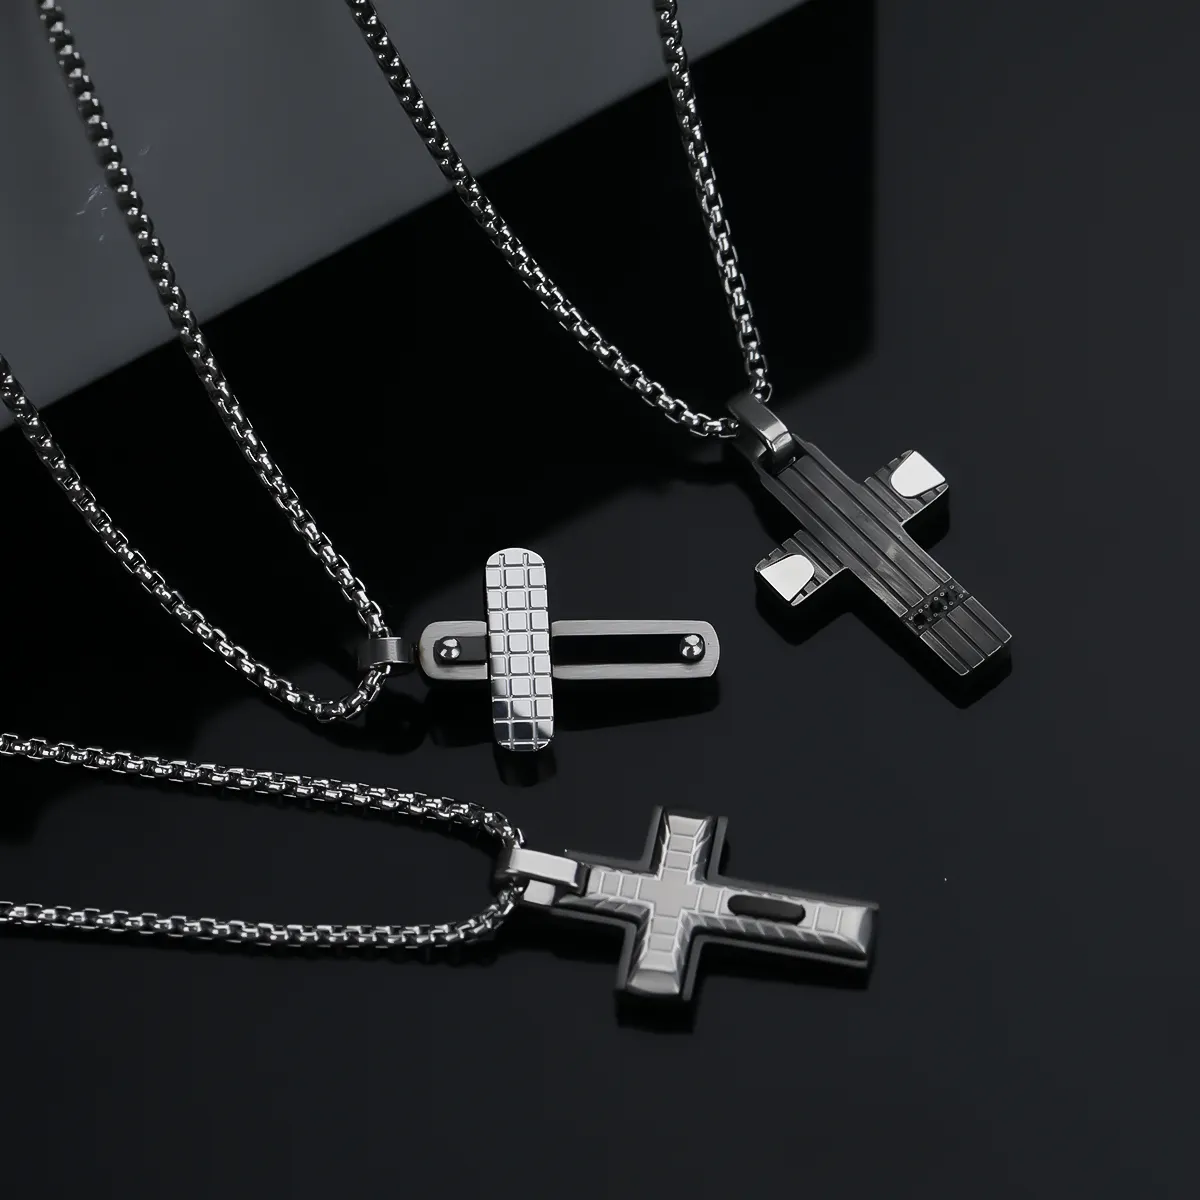 High Quality Fashion Stainless Steel Cross Pendant Necklace For Women Men Silver Black Chain Prayer Choker Jewelry